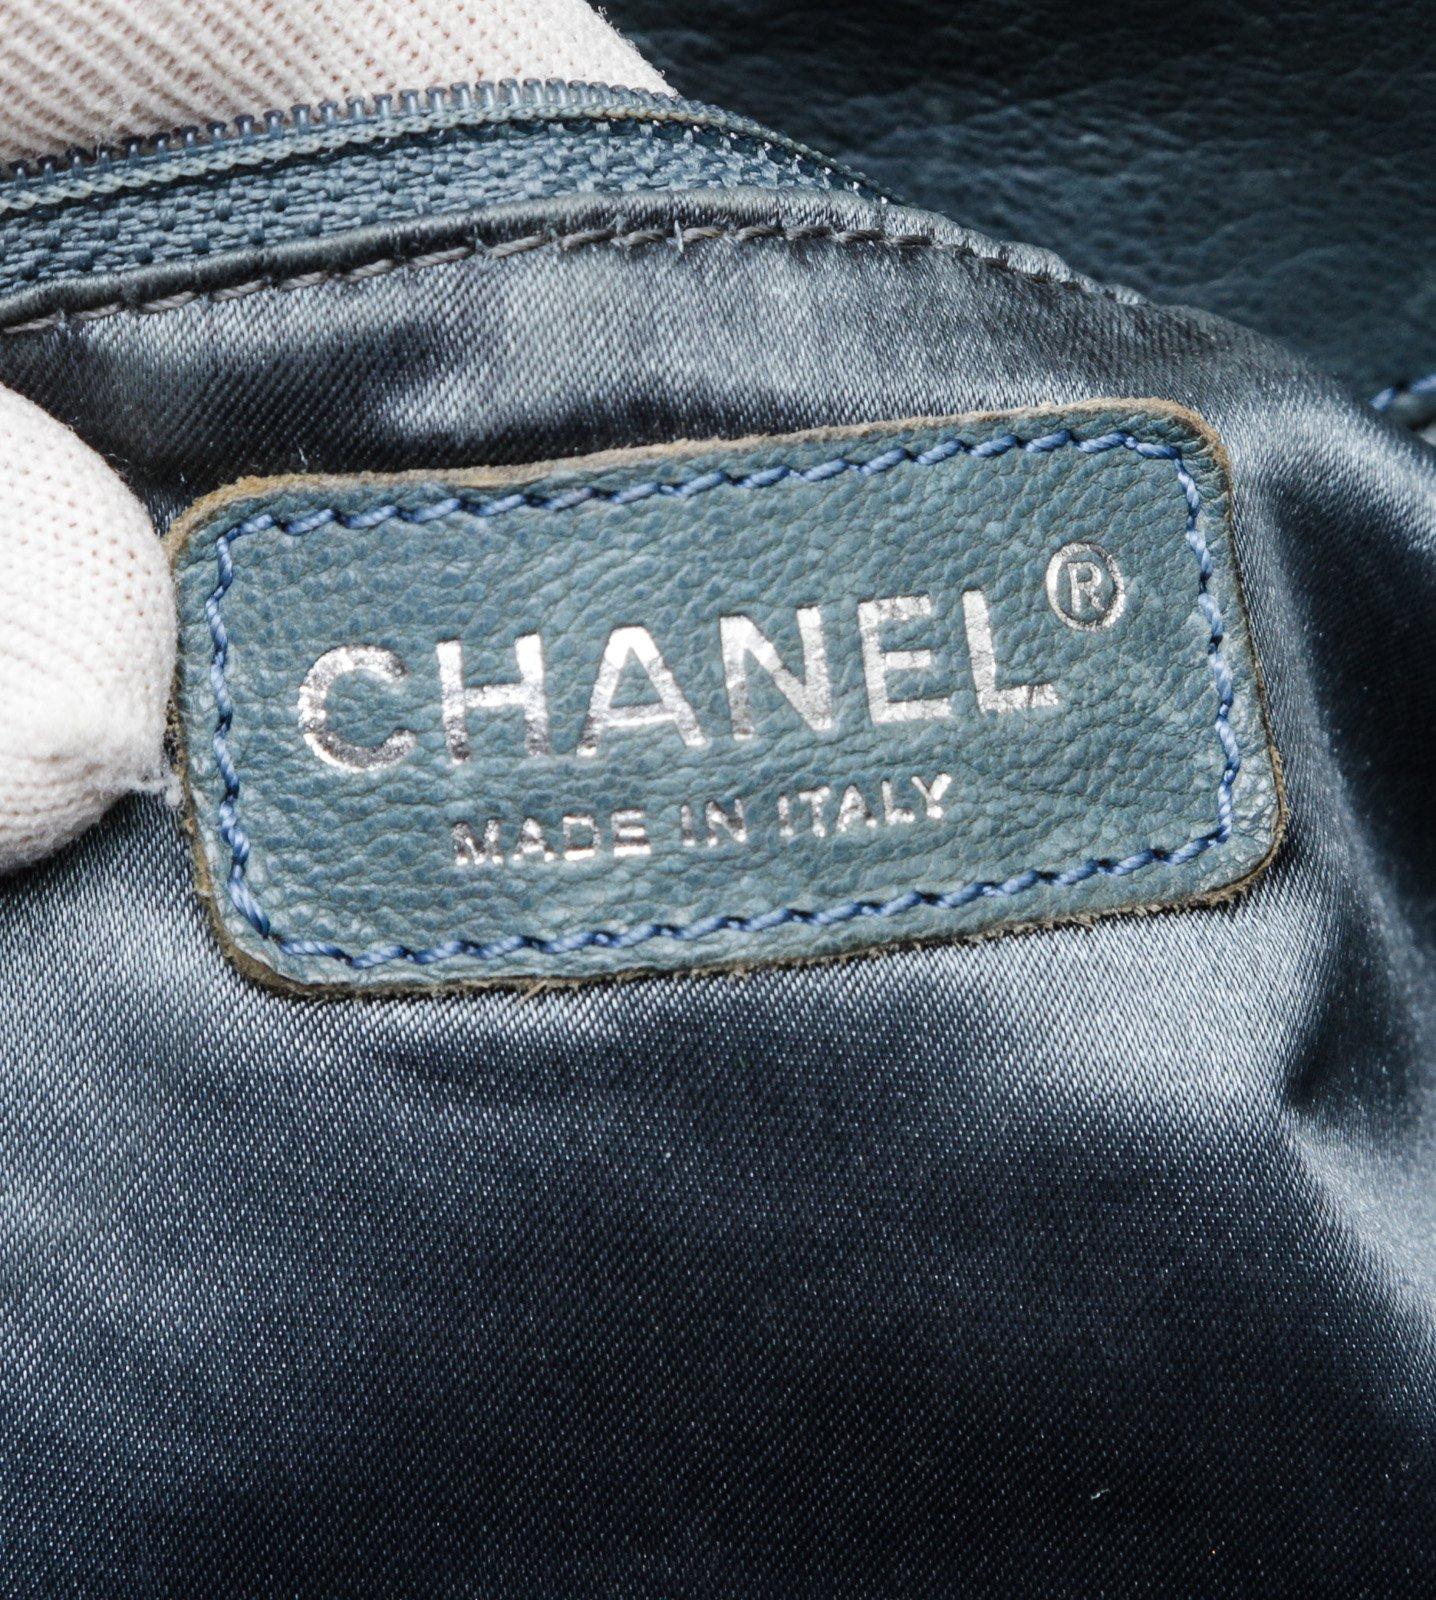 Chanel blue leather Coco Cabas shoulder bag with silver-tone hardware, chain-link and leather straps, CC charm at front, quilting detail at base, tonal satin lining, interior zip pocket, two interior slip pockets, and magnetic snap closure. Optional